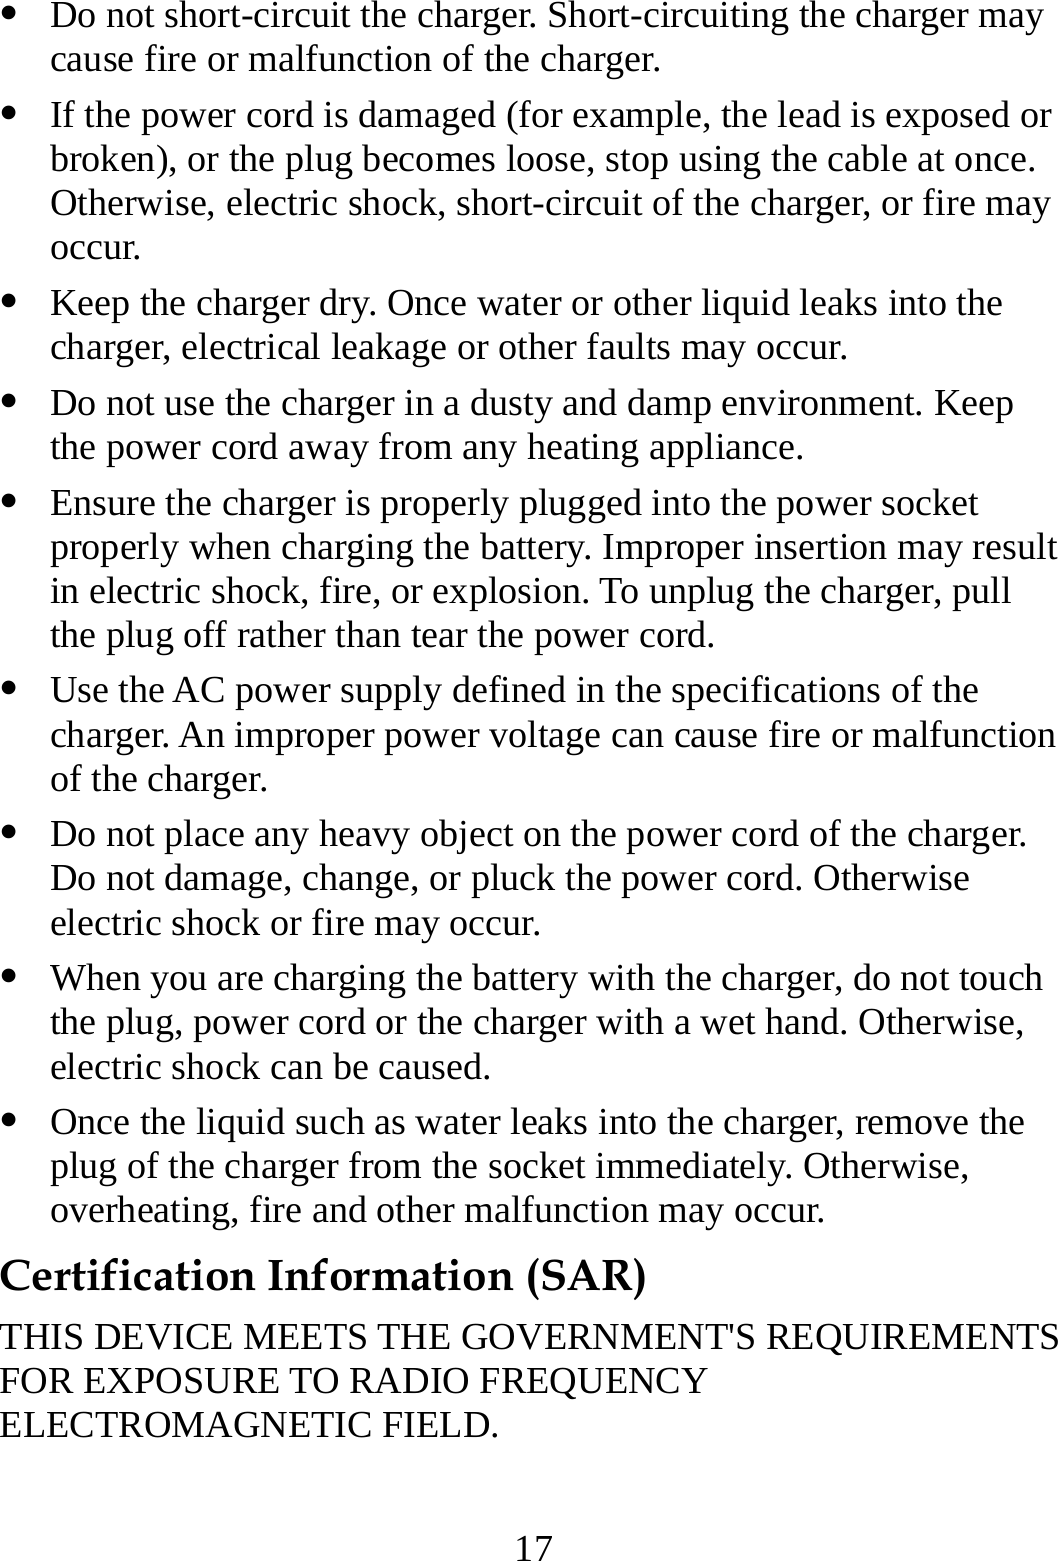  17   Do not short-circuit the charger. Short-circuiting the charger may cause fire or malfunction of the charger.   If the power cord is damaged (for example, the lead is exposed or broken), or the plug becomes loose, stop using the cable at once. Otherwise, electric shock, short-circuit of the charger, or fire may occur.   Keep the charger dry. Once water or other liquid leaks into the charger, electrical leakage or other faults may occur.   Do not use the charger in a dusty and damp environment. Keep the power cord away from any heating appliance.   Ensure the charger is properly plugged into the power socket properly when charging the battery. Improper insertion may result in electric shock, fire, or explosion. To unplug the charger, pull the plug off rather than tear the power cord.   Use the AC power supply defined in the specifications of the charger. An improper power voltage can cause fire or malfunction of the charger.   Do not place any heavy object on the power cord of the charger. Do not damage, change, or pluck the power cord. Otherwise electric shock or fire may occur.   When you are charging the battery with the charger, do not touch the plug, power cord or the charger with a wet hand. Otherwise, electric shock can be caused.   Once the liquid such as water leaks into the charger, remove the plug of the charger from the socket immediately. Otherwise, overheating, fire and other malfunction may occur. Certification Information (SAR) THIS DEVICE MEETS THE GOVERNMENT&apos;S REQUIREMENTS FOR EXPOSURE TO RADIO FREQUENCY ELECTROMAGNETIC FIELD. 